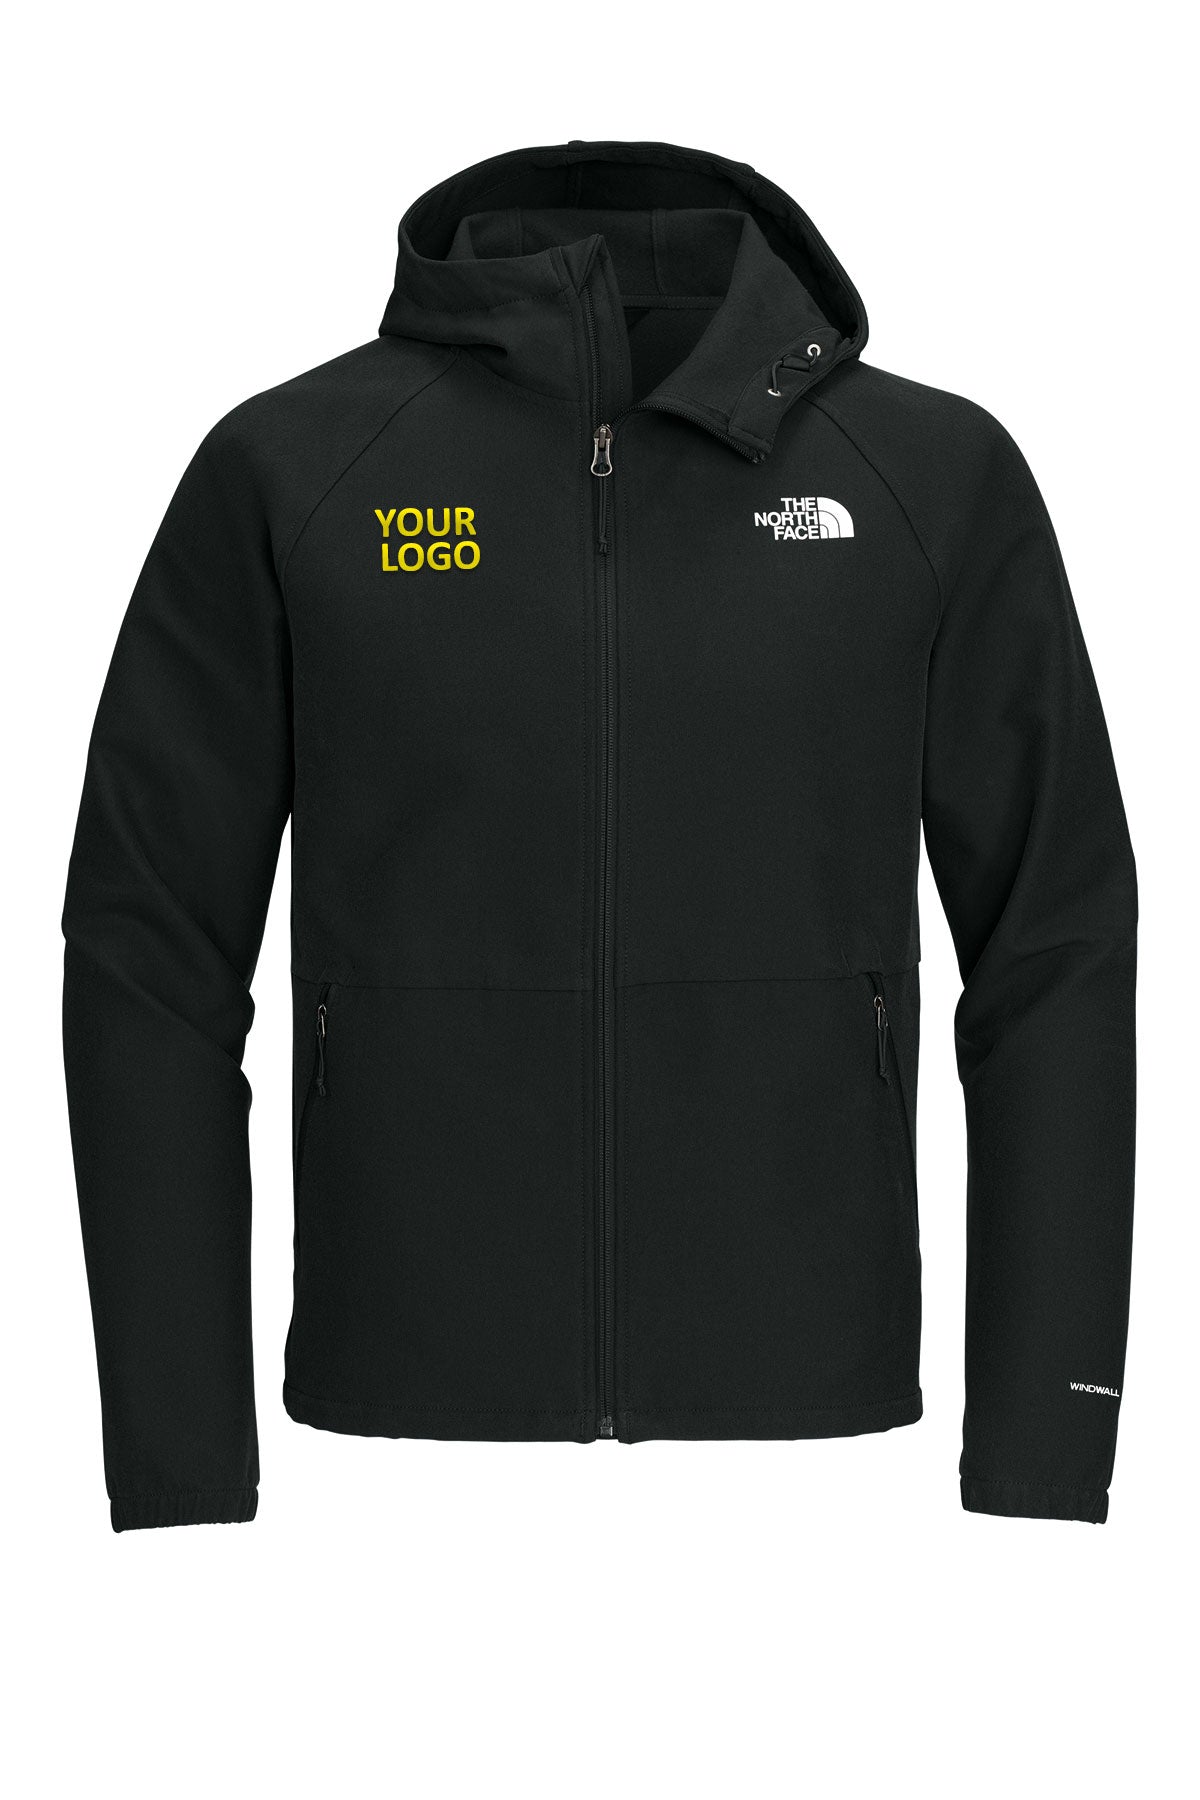 The North Face TNF Black Heather NF0A8BUF company jackets with logo